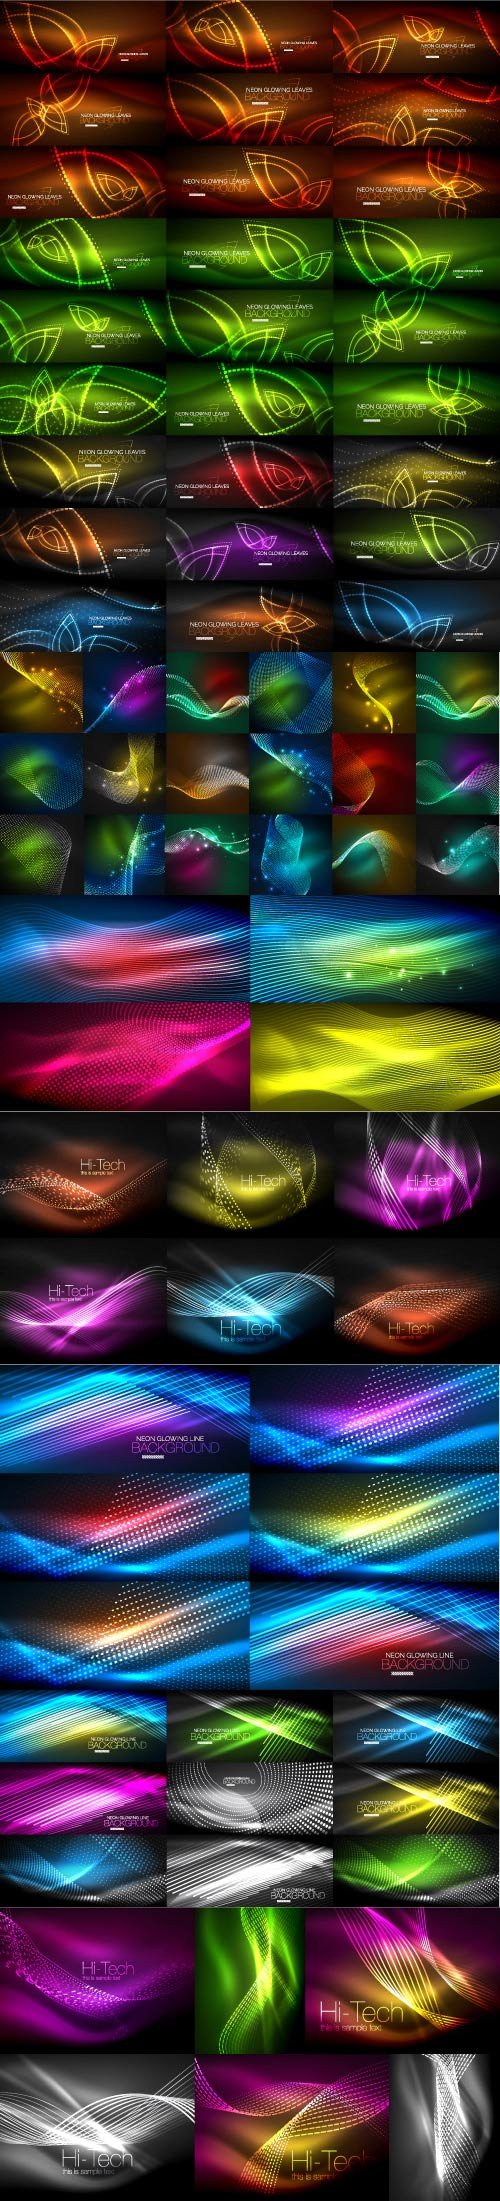 Mega collection of neon glowing waves # 3